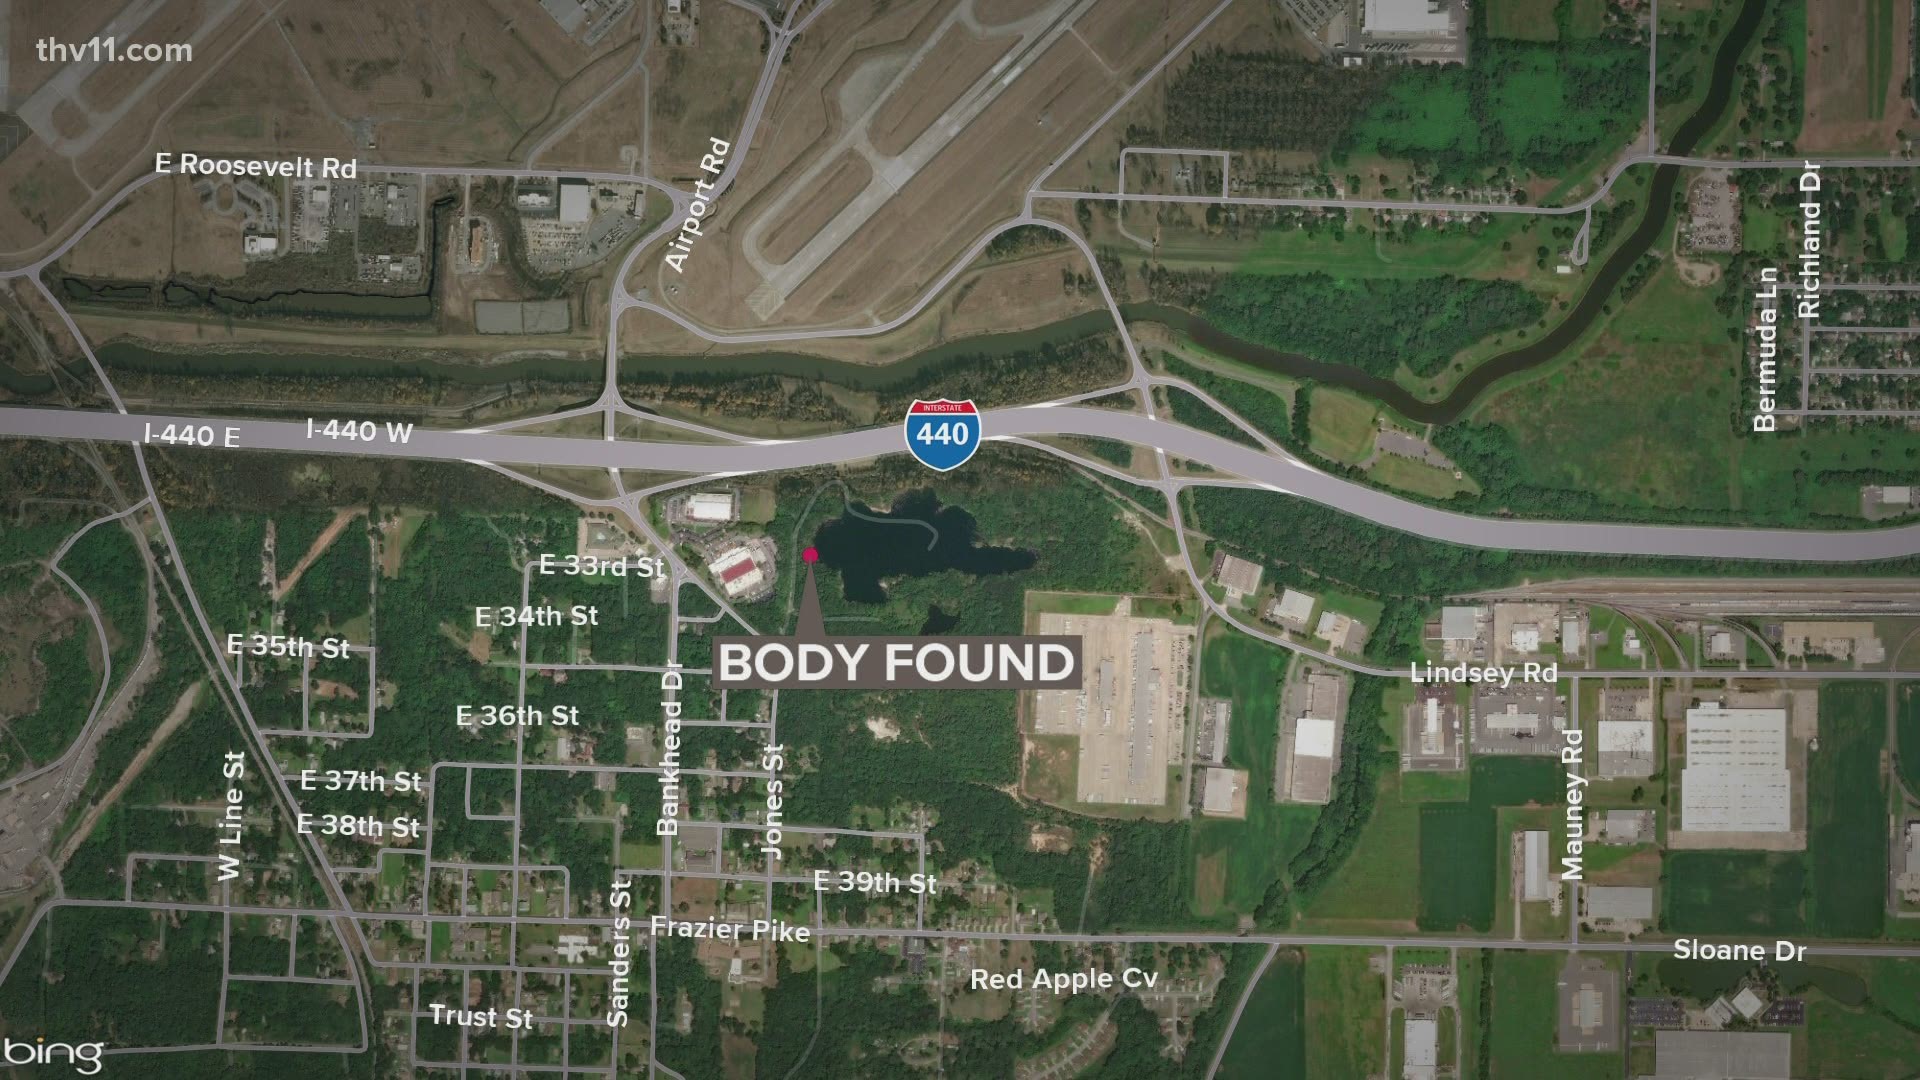 Little Rock police are investigating after a man's body was found near the airport.